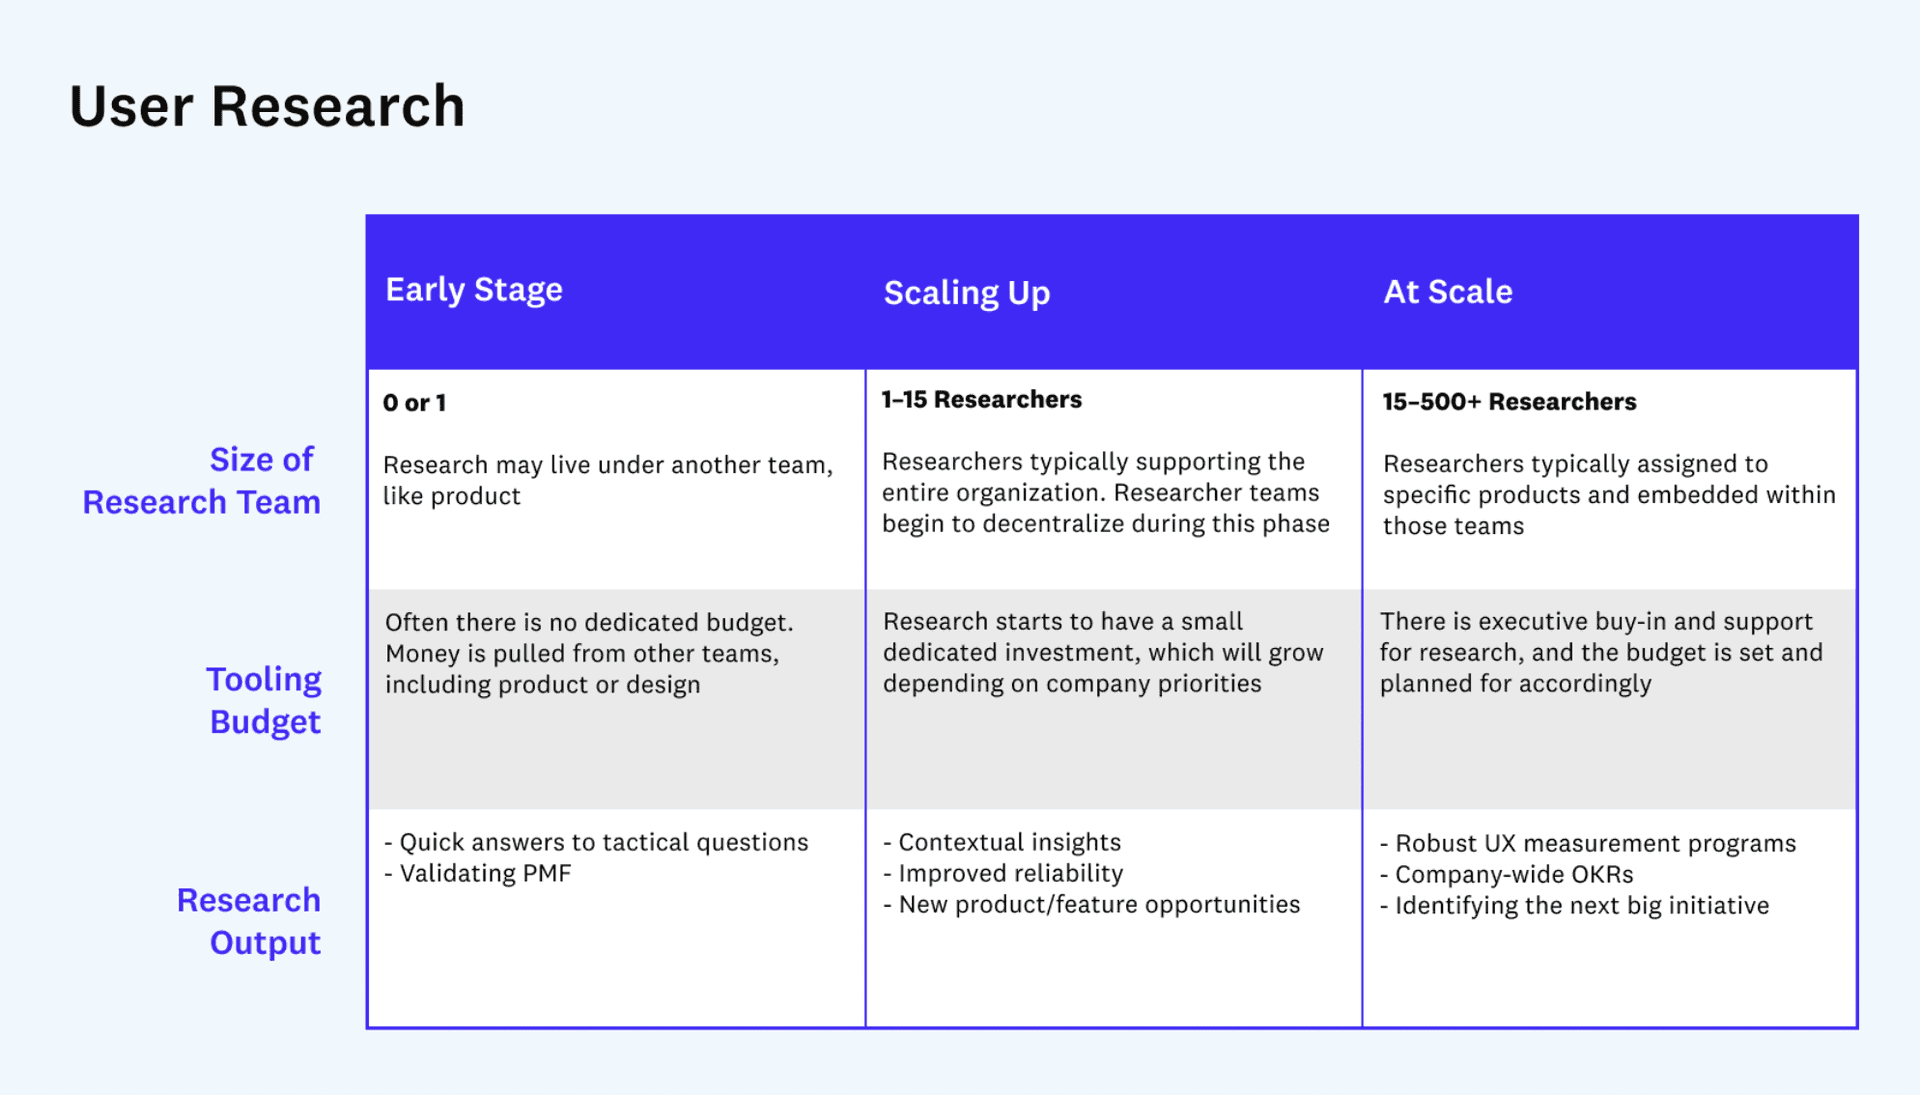 Chart showing stages of research maturity